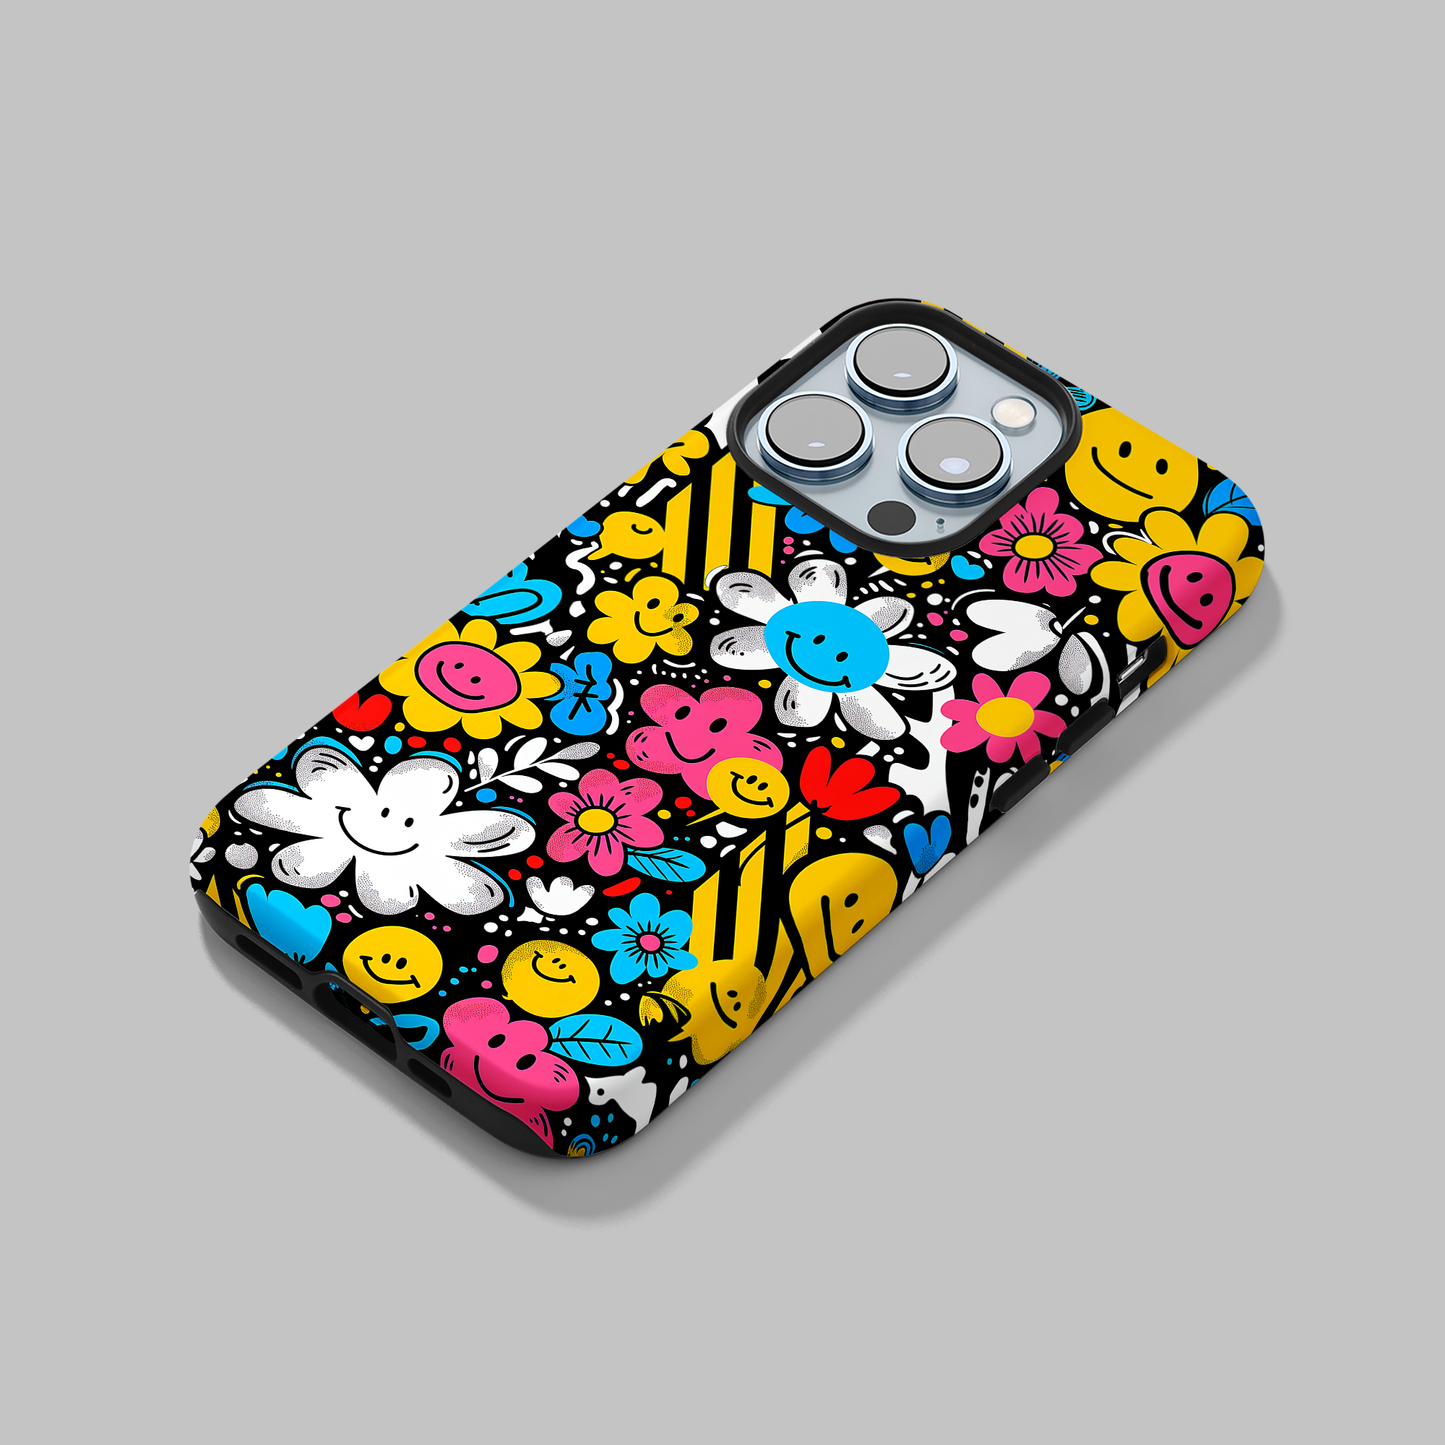 Cheerful Smiley Faces  (iPhone Case 11-15)-Elevate your iPhone's protection and style with RimaGallery'sA playful phone case with a cheerful mix of smiley faces and colorful flowers On case, featuring dual-la-smiley faces